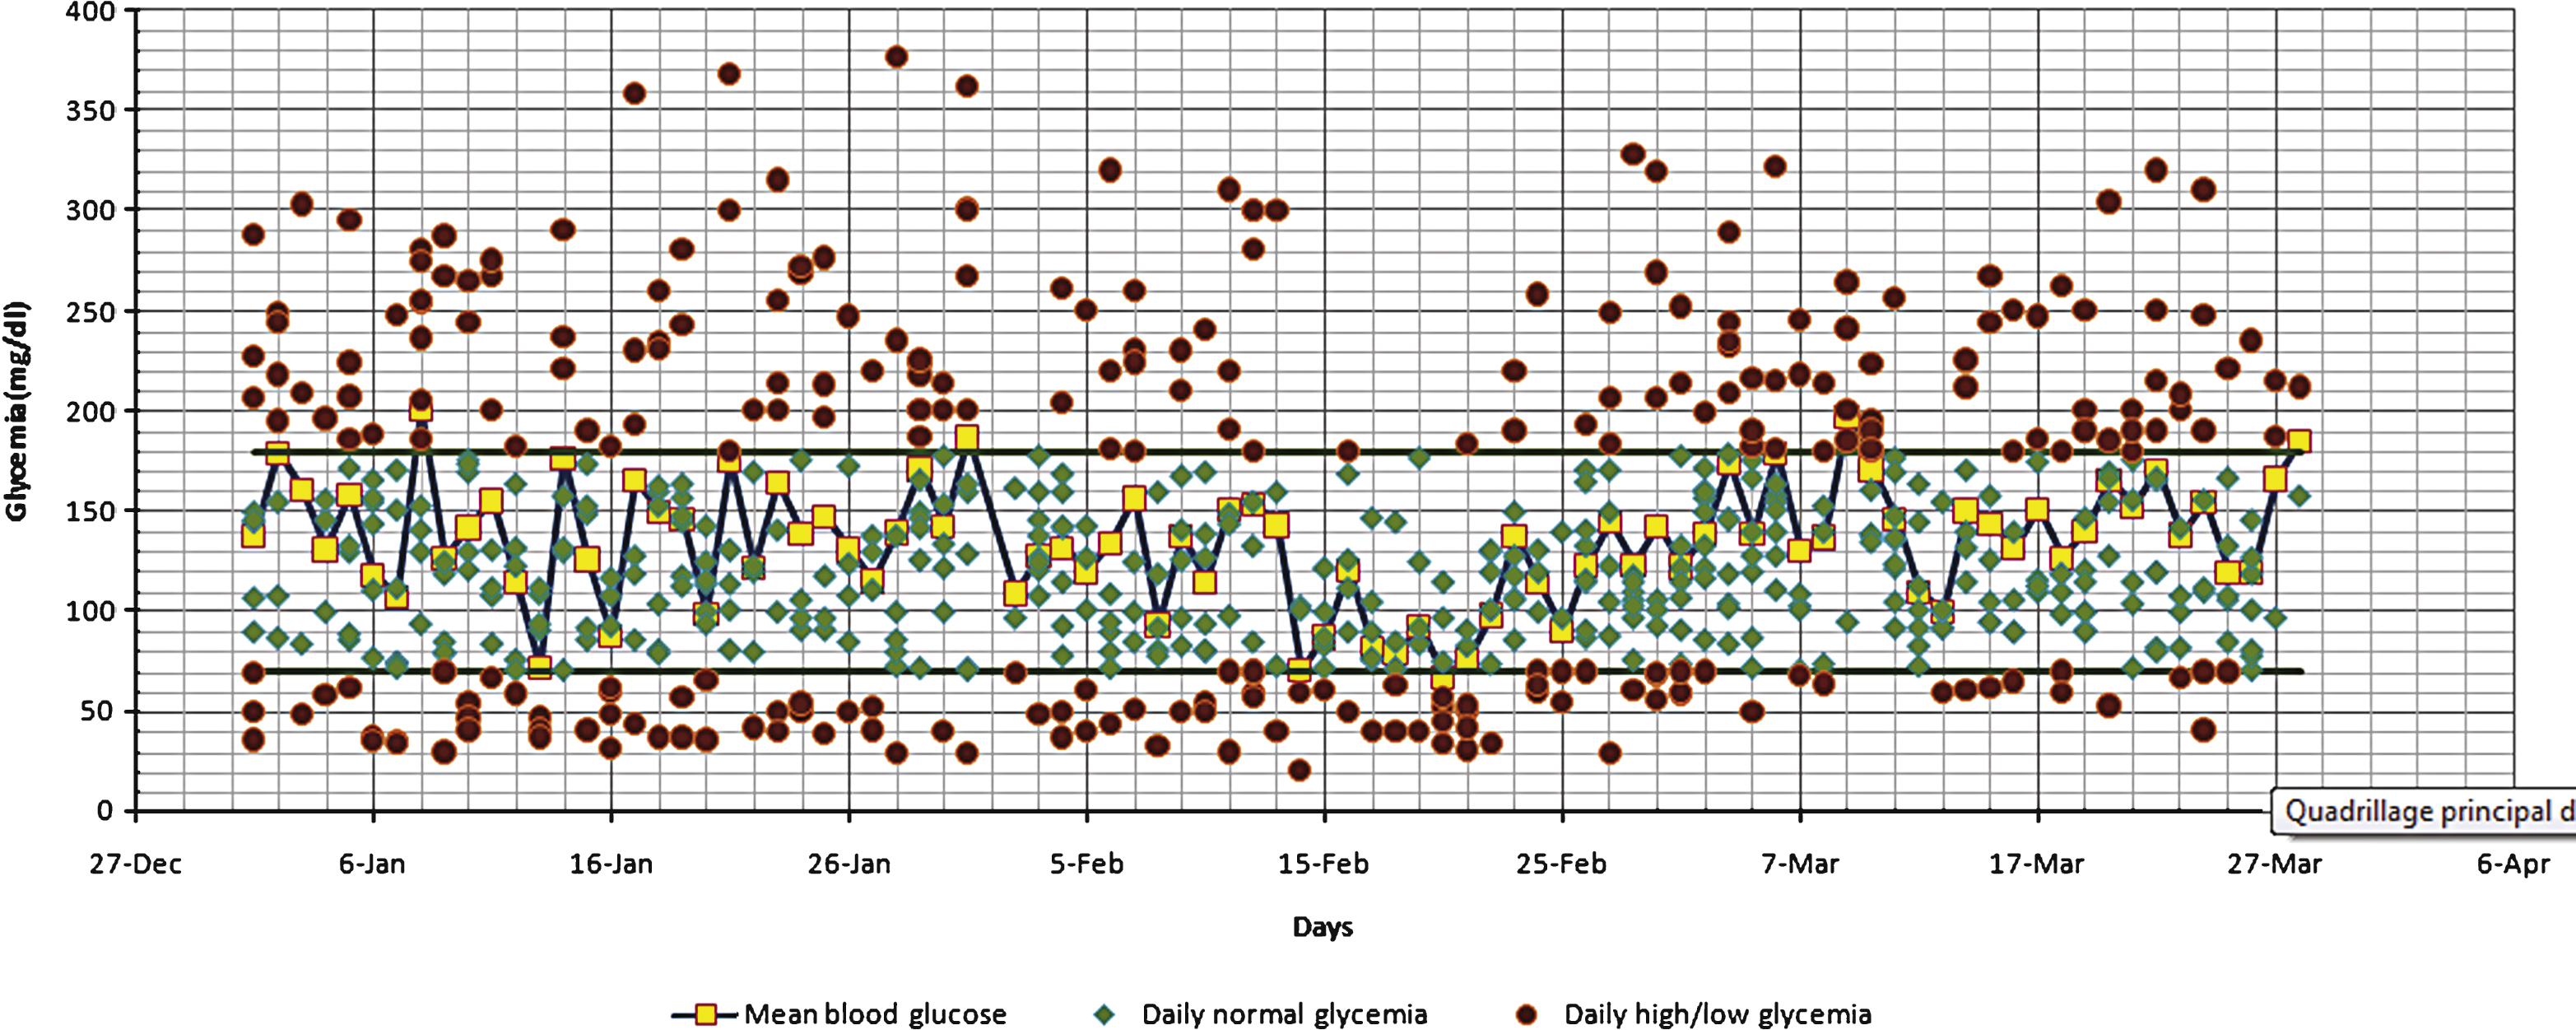 Daily variation and mean of blood glucose during three months.